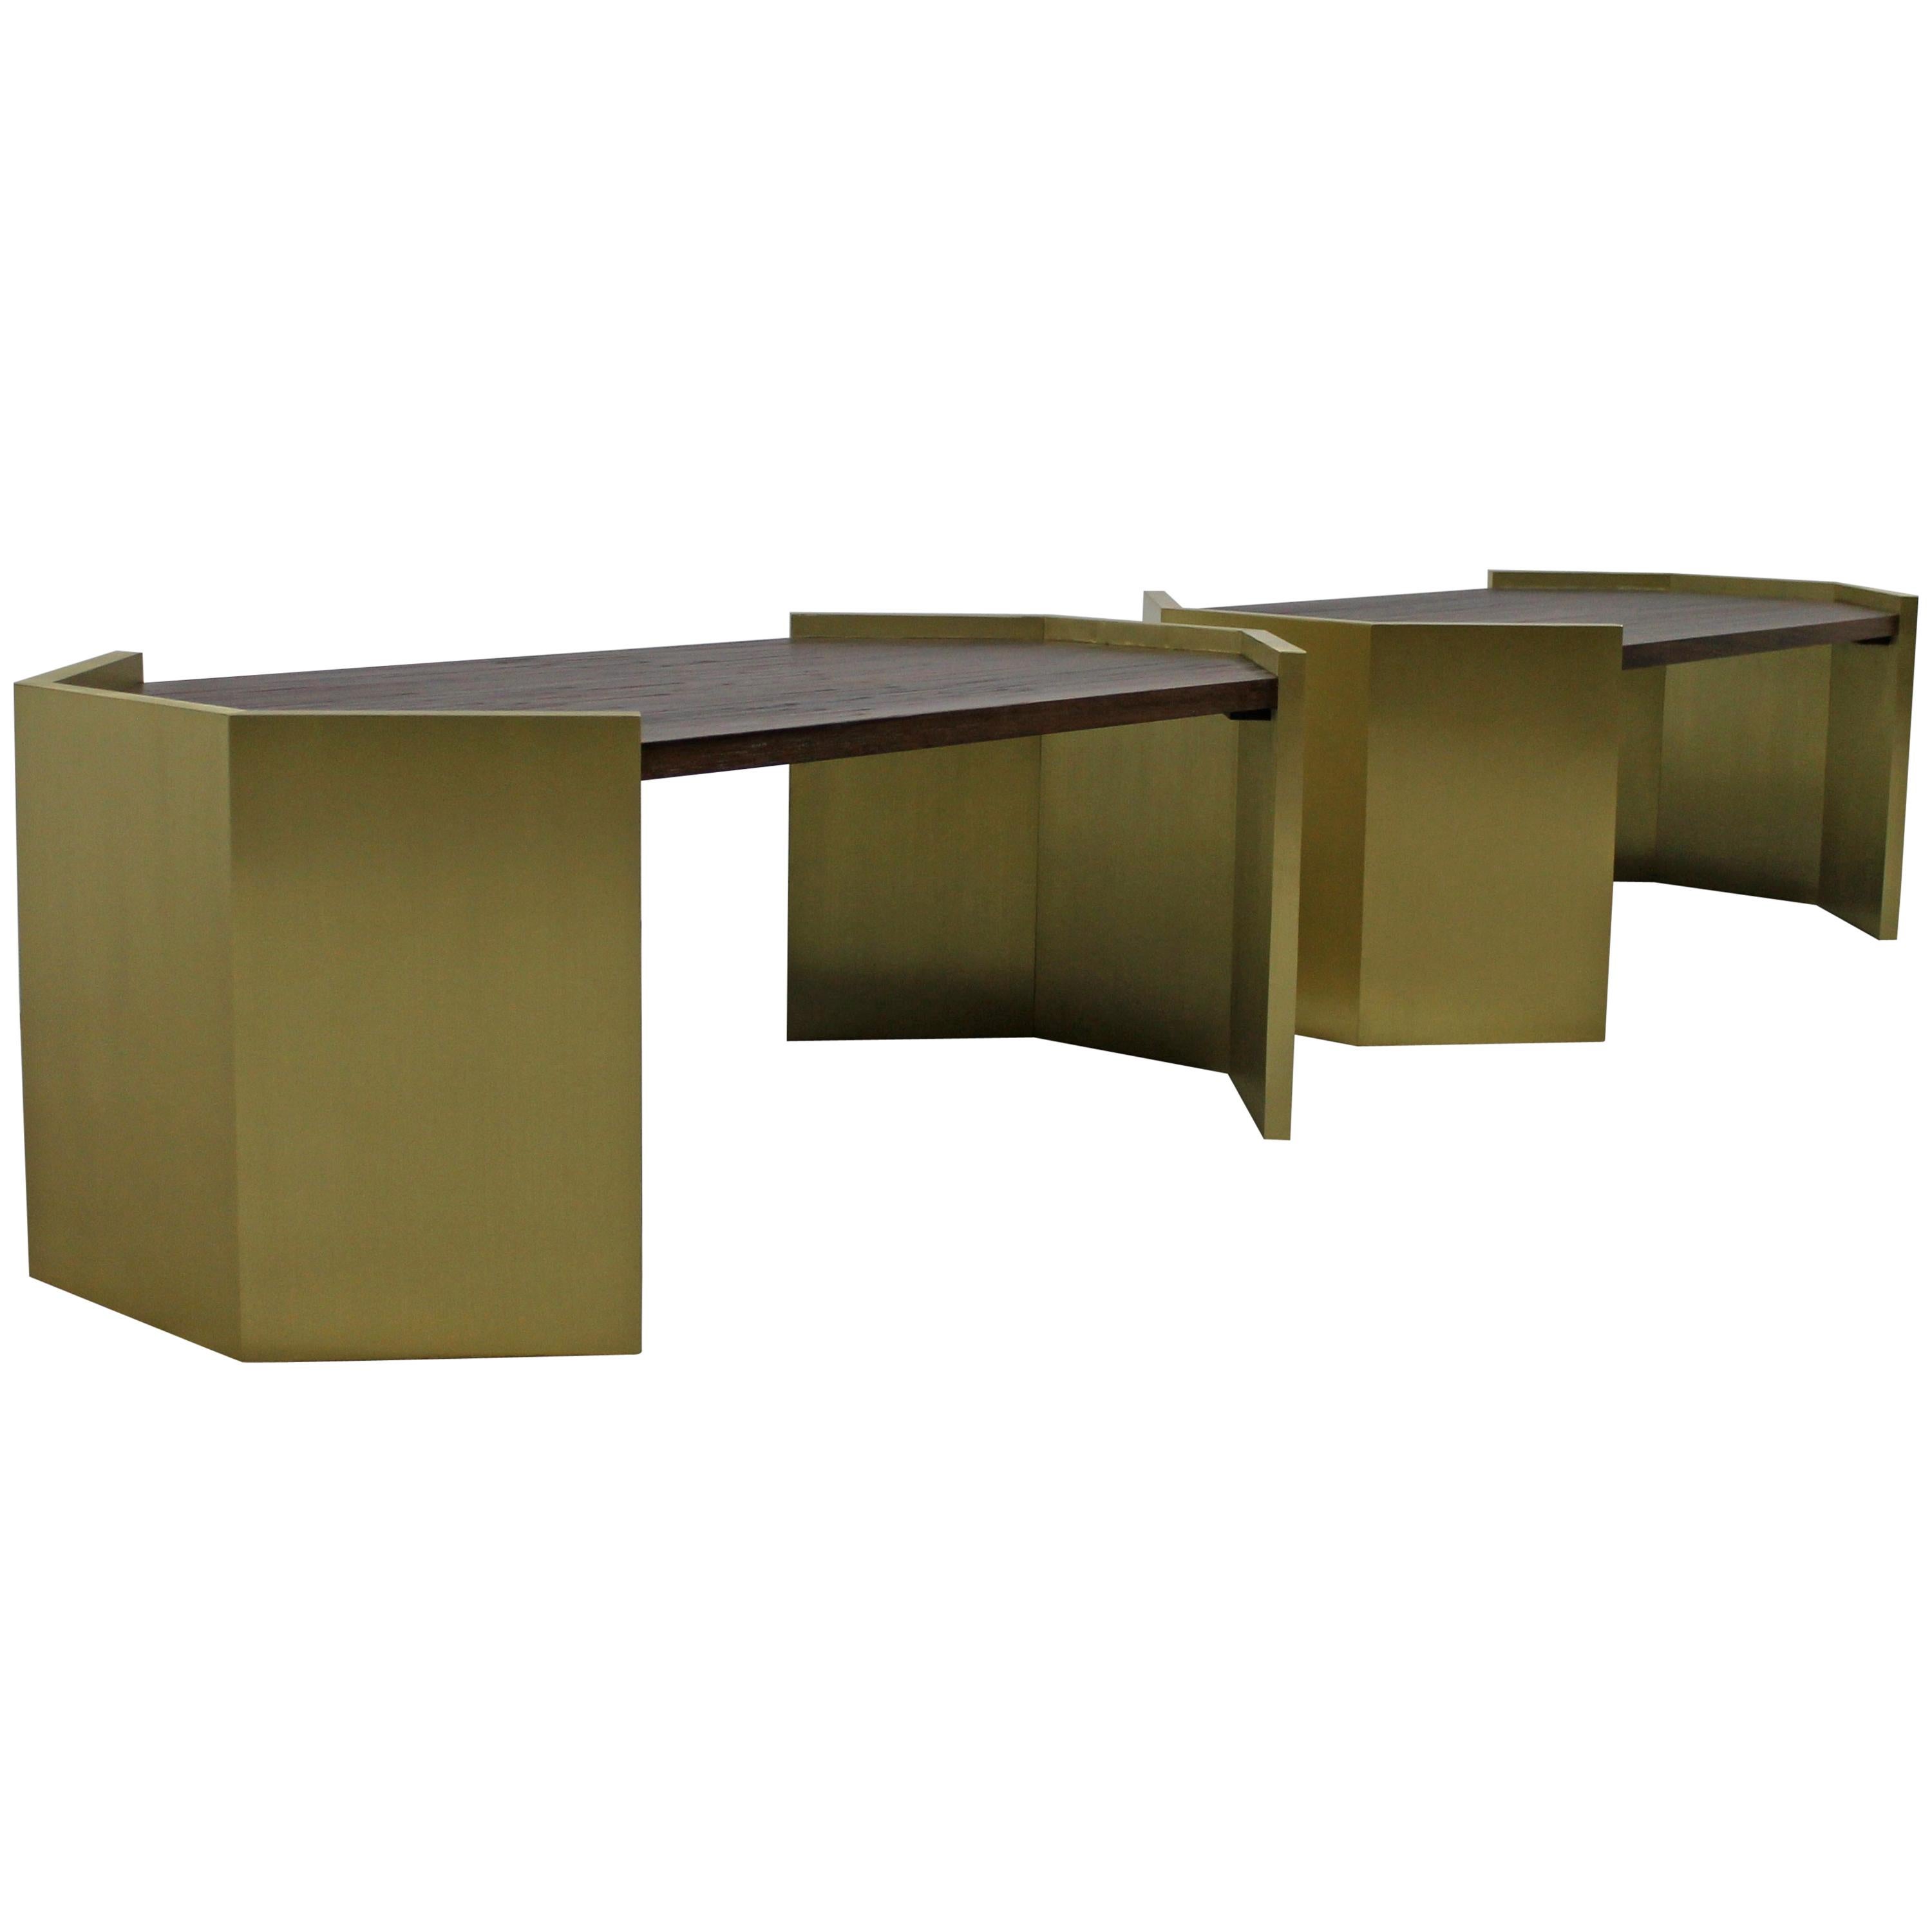 Pair of Brass and Wood Coffee Tables by Costantini for Robert AM Stern For Sale